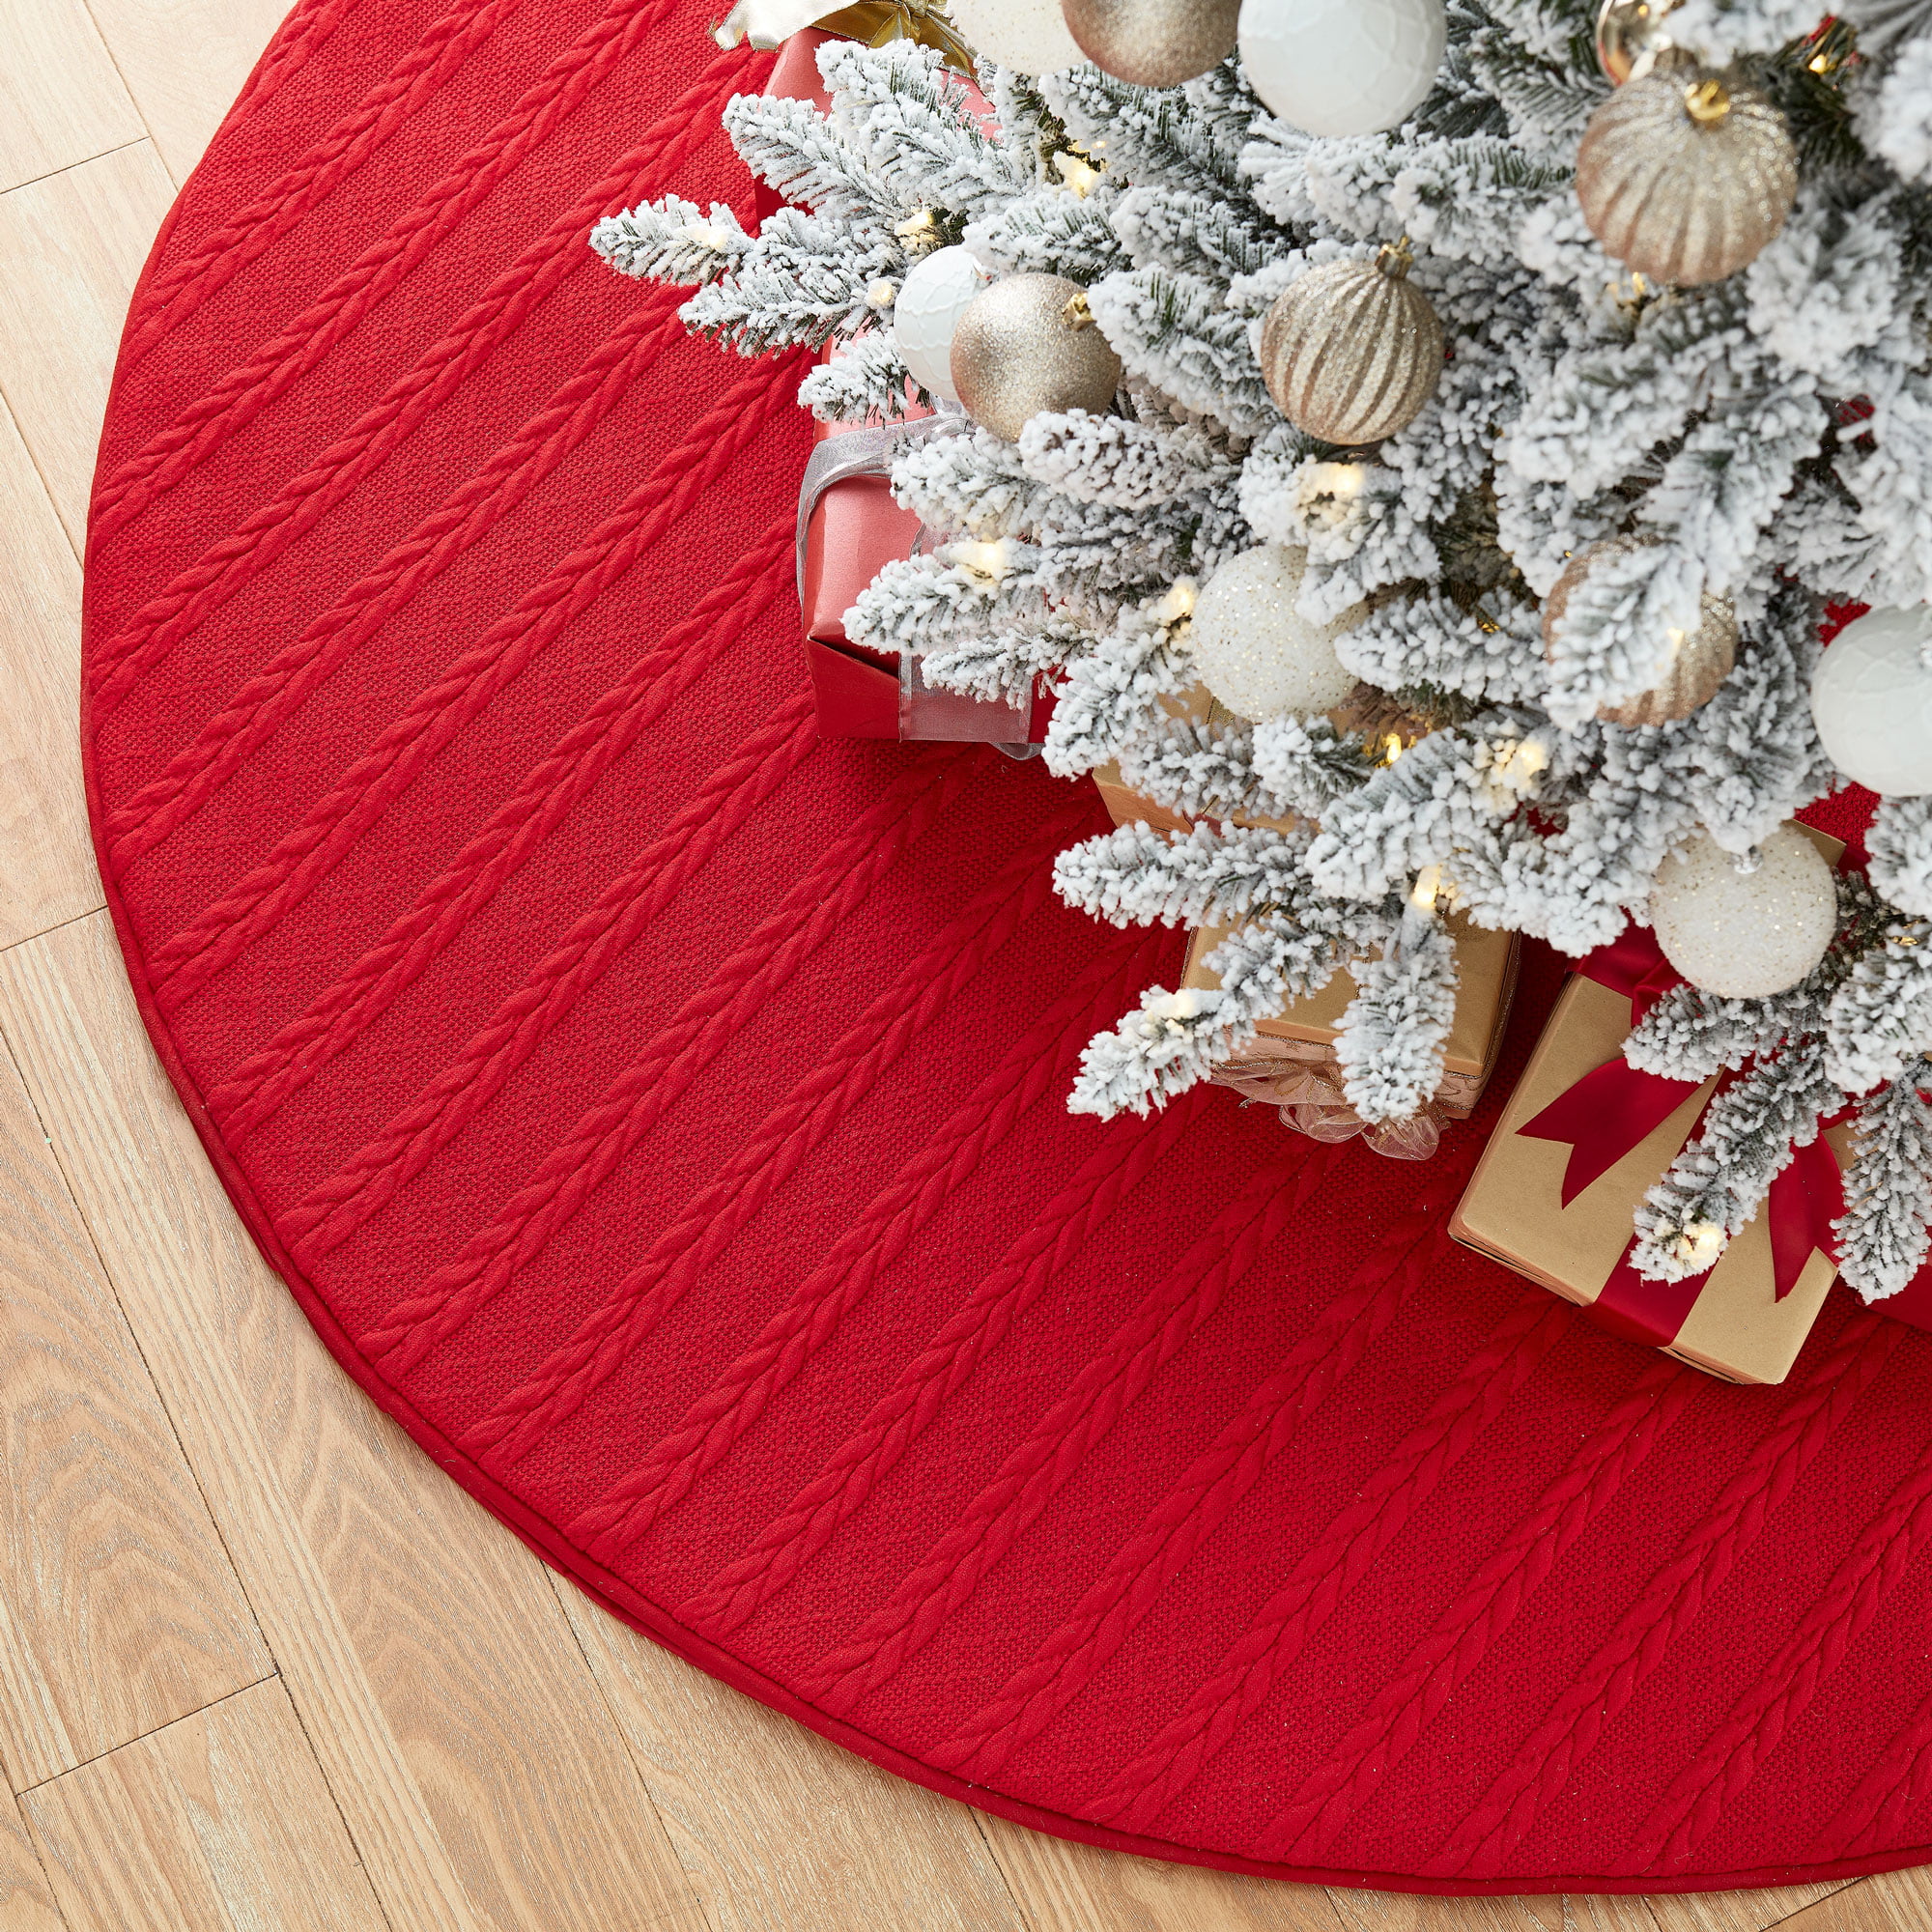 Details about   Holiday Living 56 Inch Knit Tree Skirt Red/Black/Tan With Faux Fur Border 